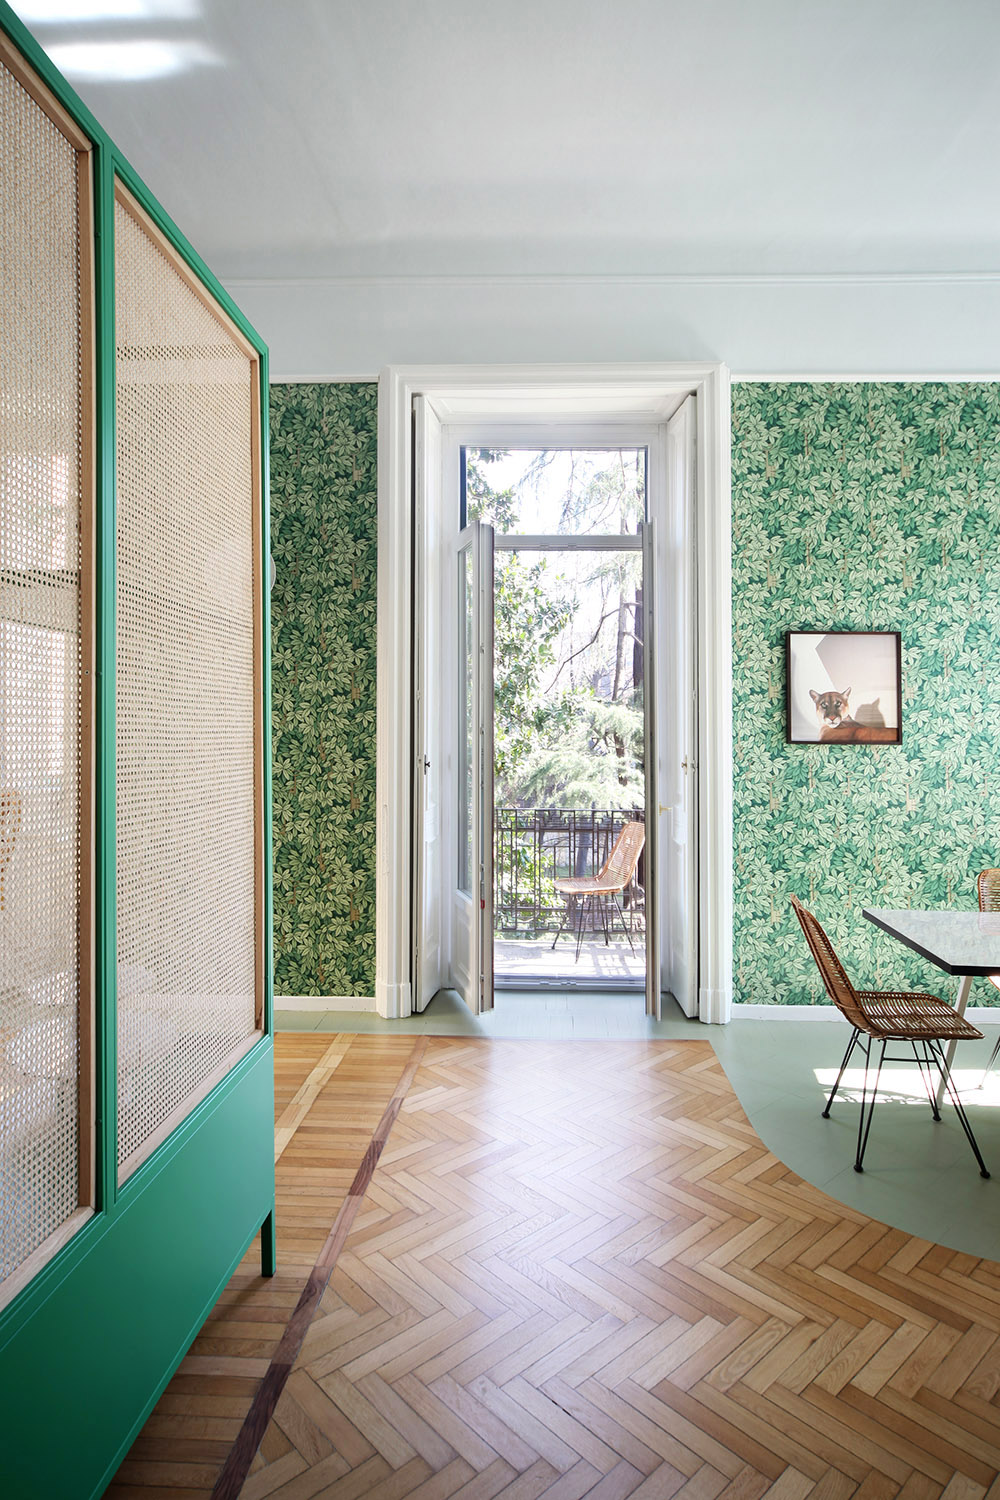 green cane screen creates a hallway with lush leaf wallpaper | room of the week on coco kelley